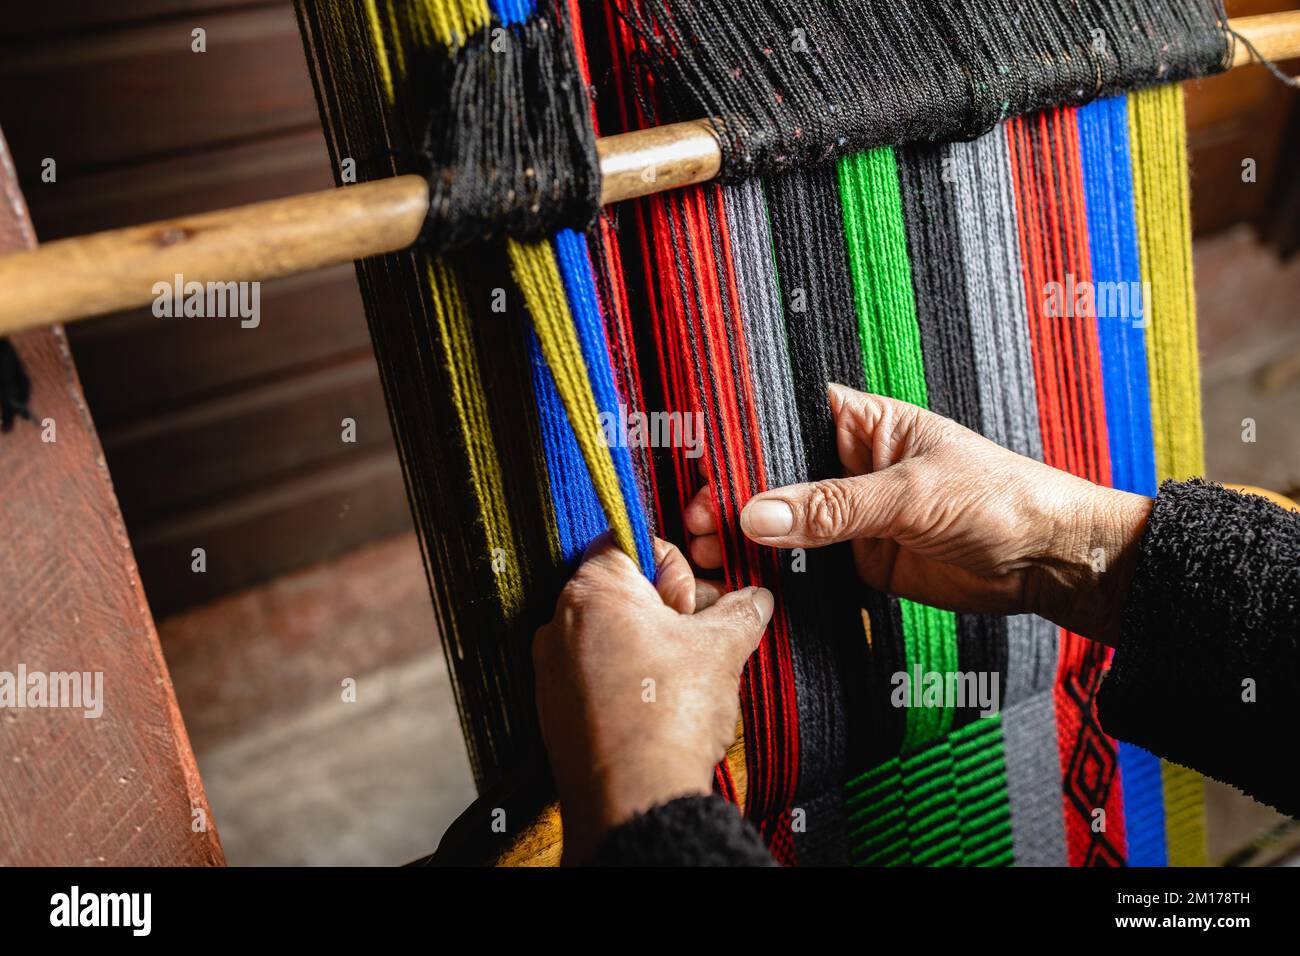 Unrecognizable elder woman's hands using a homemade craft loom to weave colorful wool Stock Photo